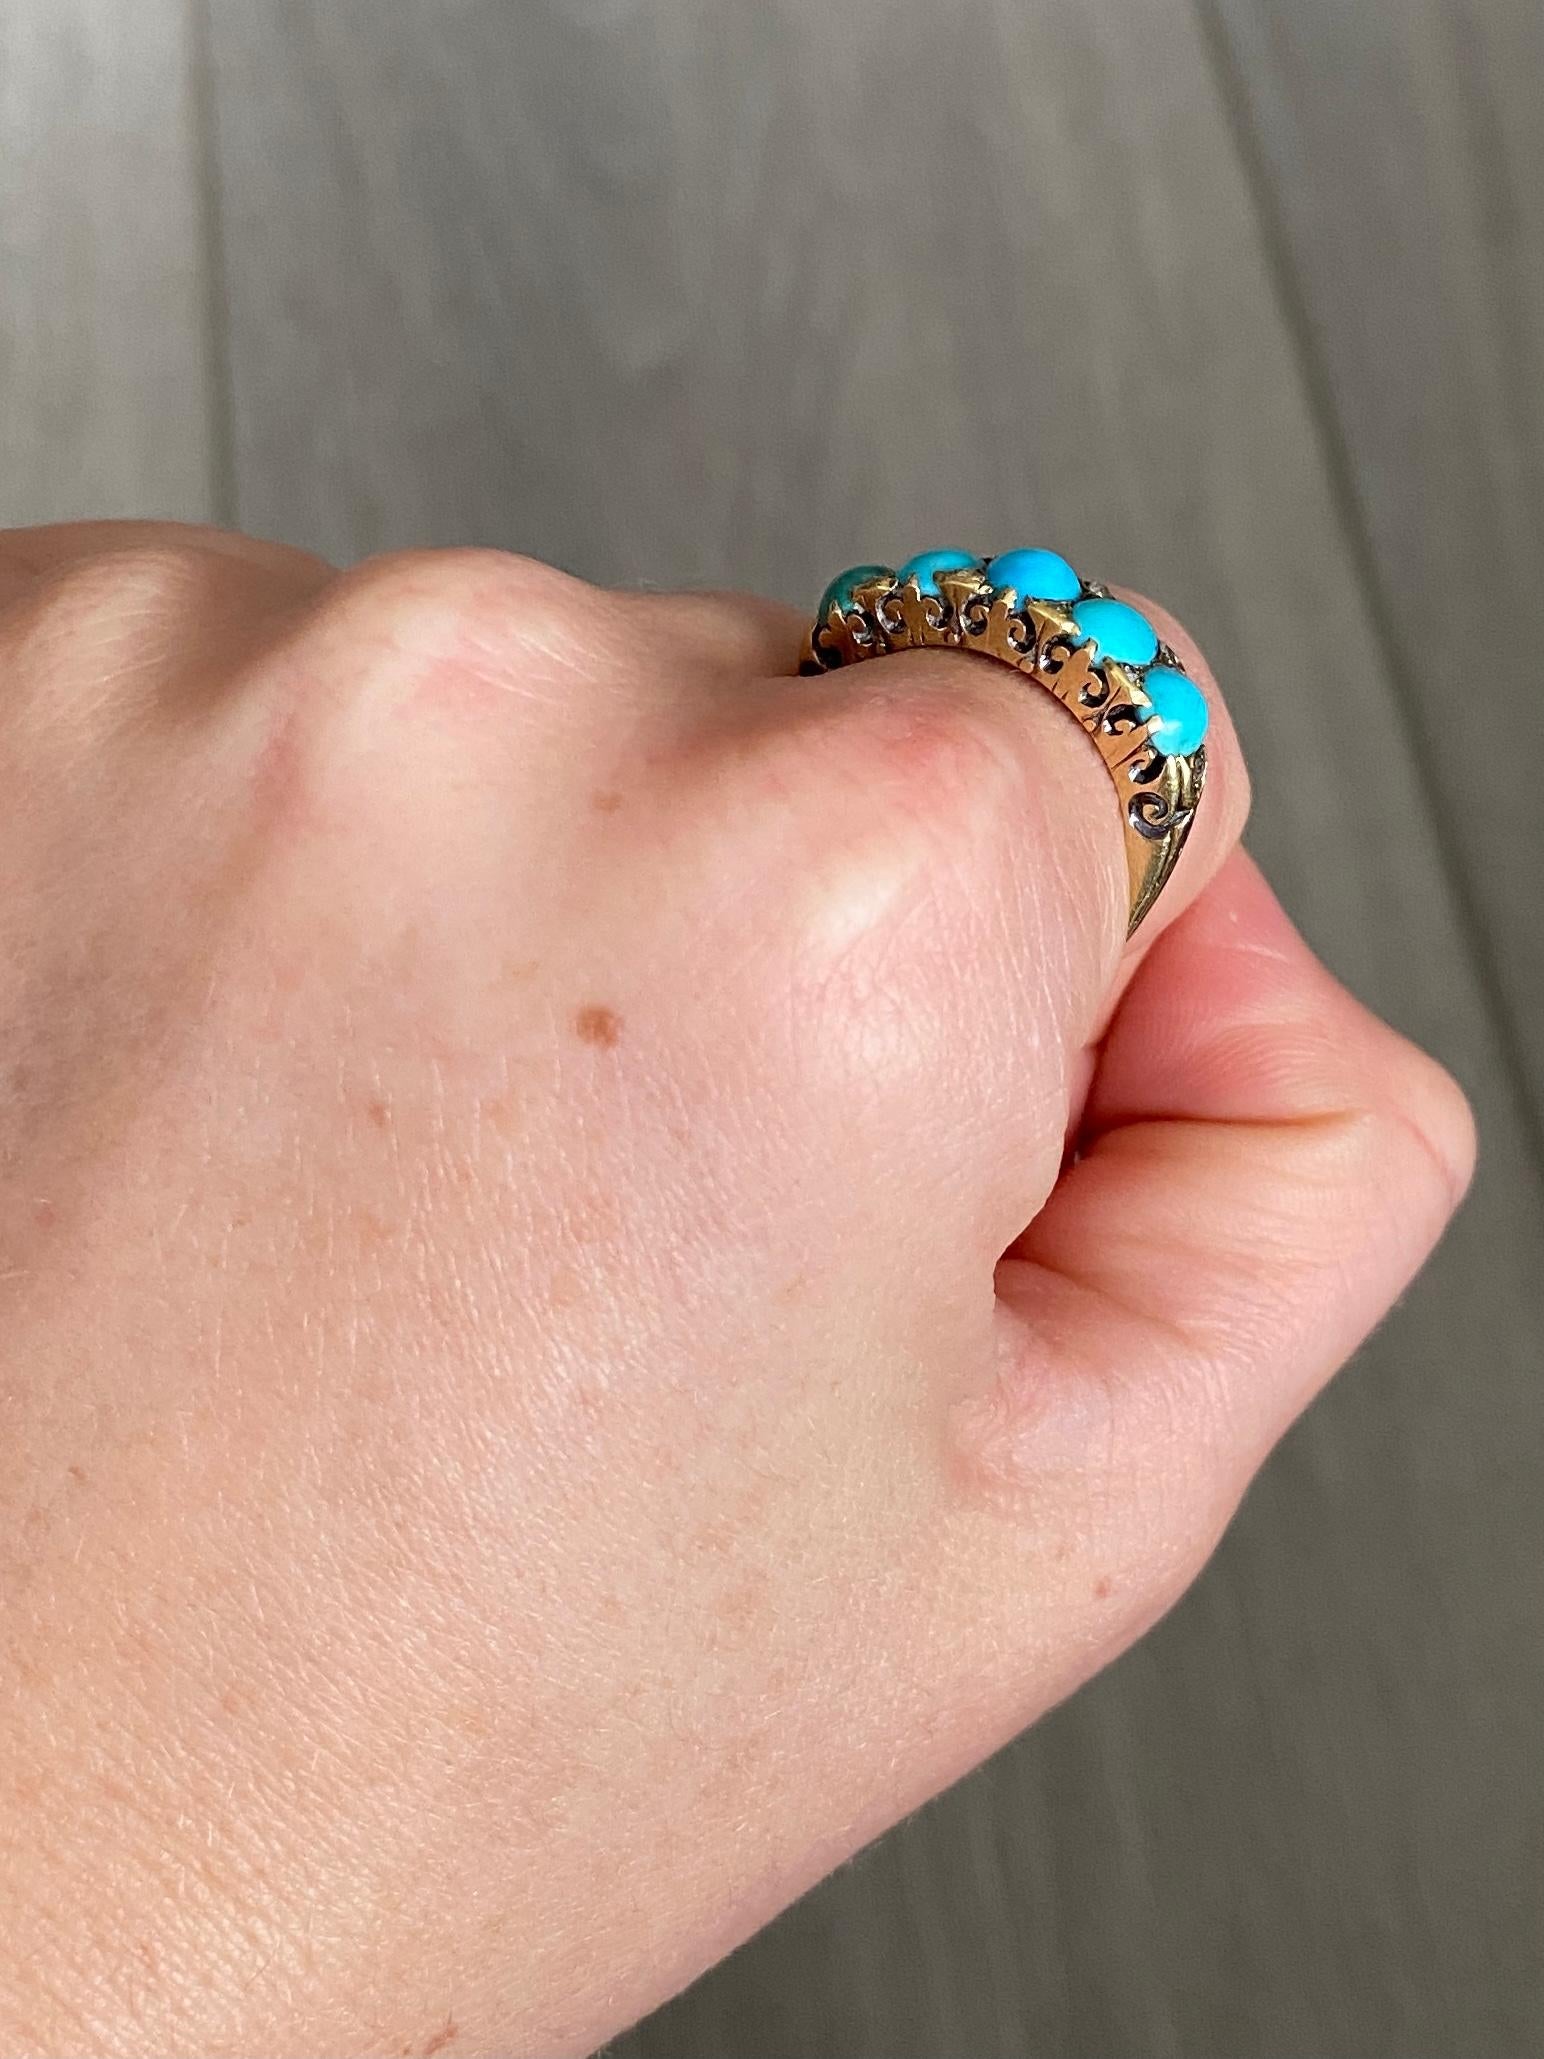 A spectacular vintage five-stone ring. Set with five wonderful cabochon cut turquoise with diamonds points in between. Modelled in 18 carat yellow gold.

Ring Size: O or 7 1/4 
Band Width: 7mm
Height Off Finger: 5mm

Weight: 4.9